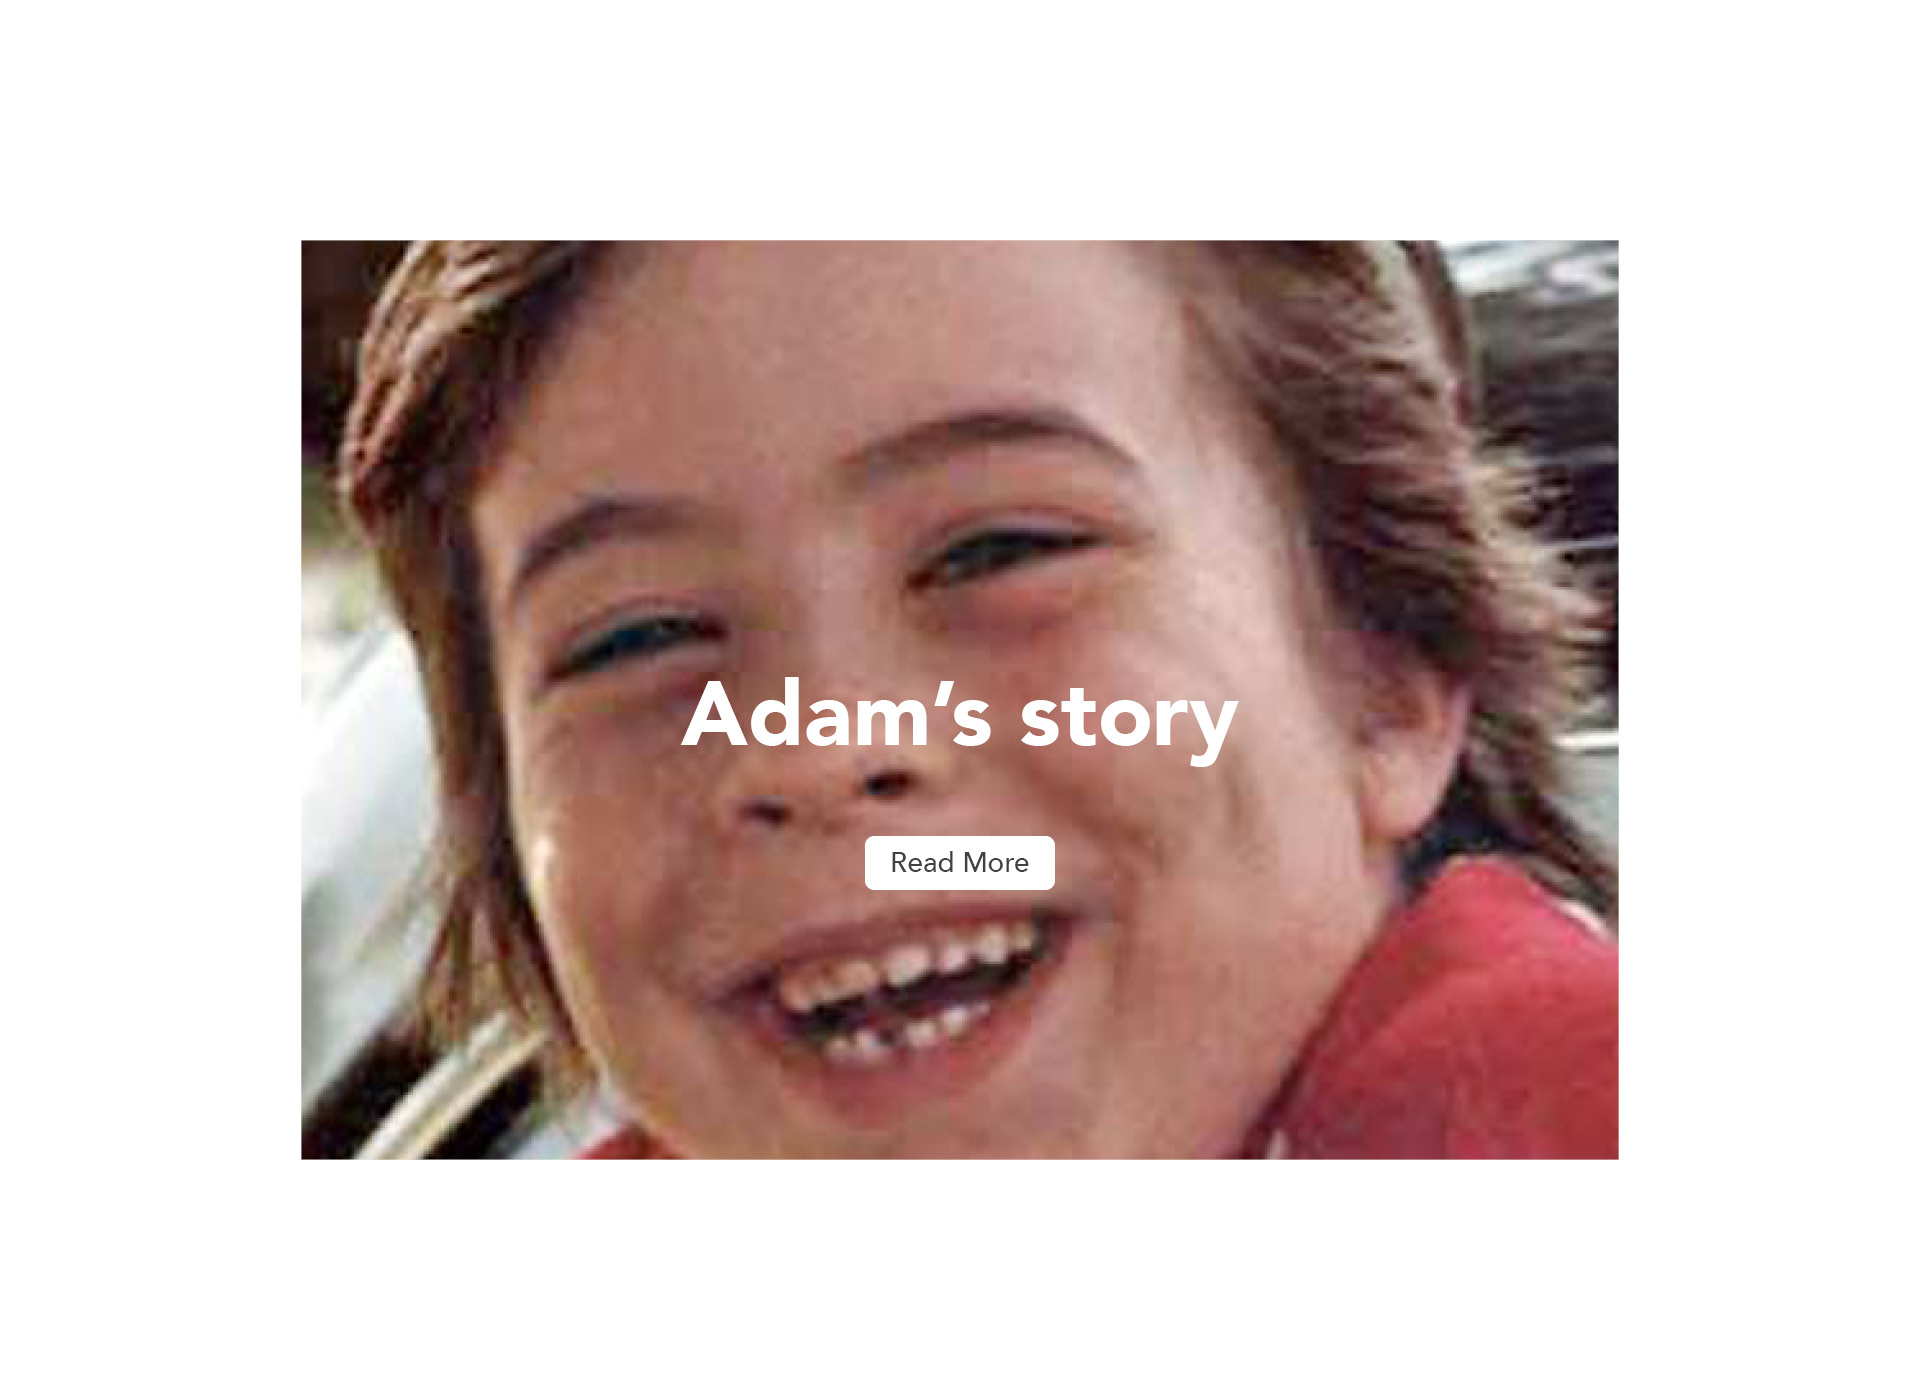 close up of adam's face, smiling, missing bottom tooth